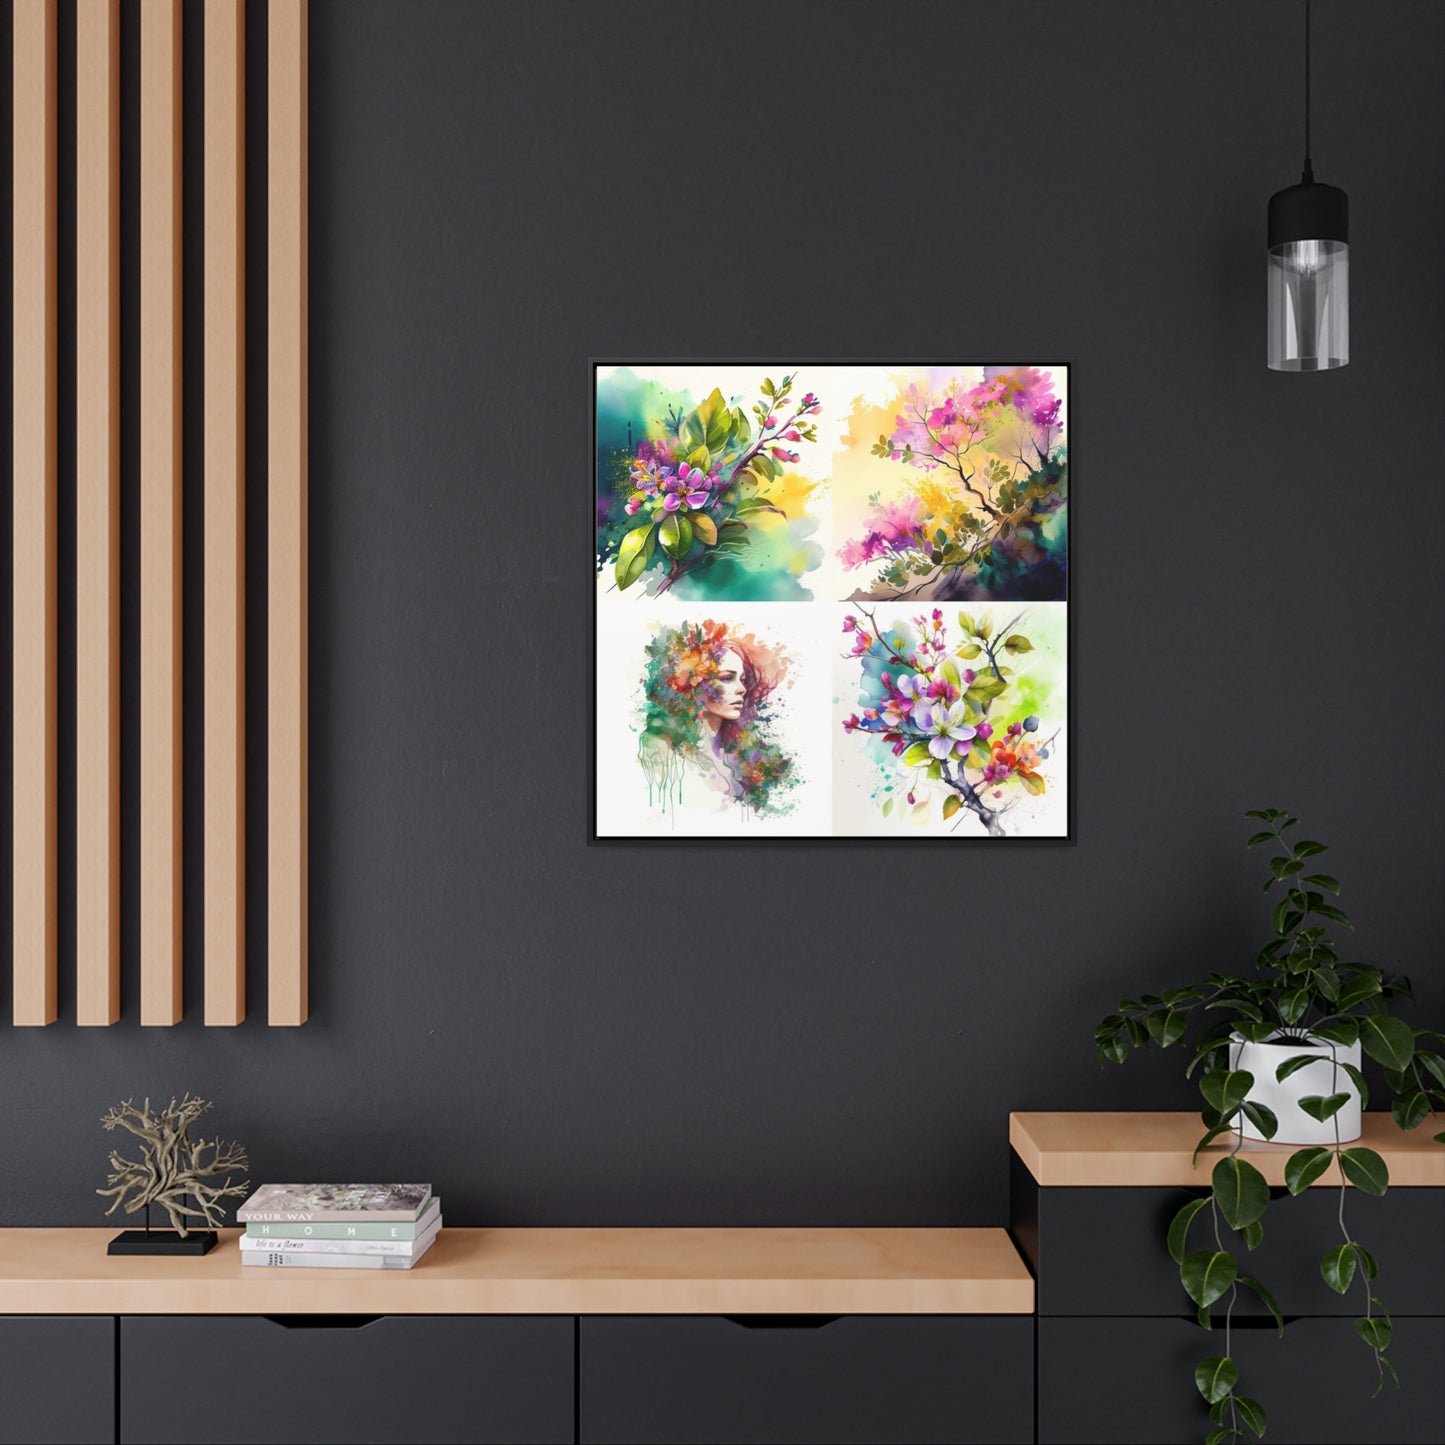 Gallery Canvas Wraps, Square Frame Mother Nature Bright Spring Colors Realistic Watercolor 5